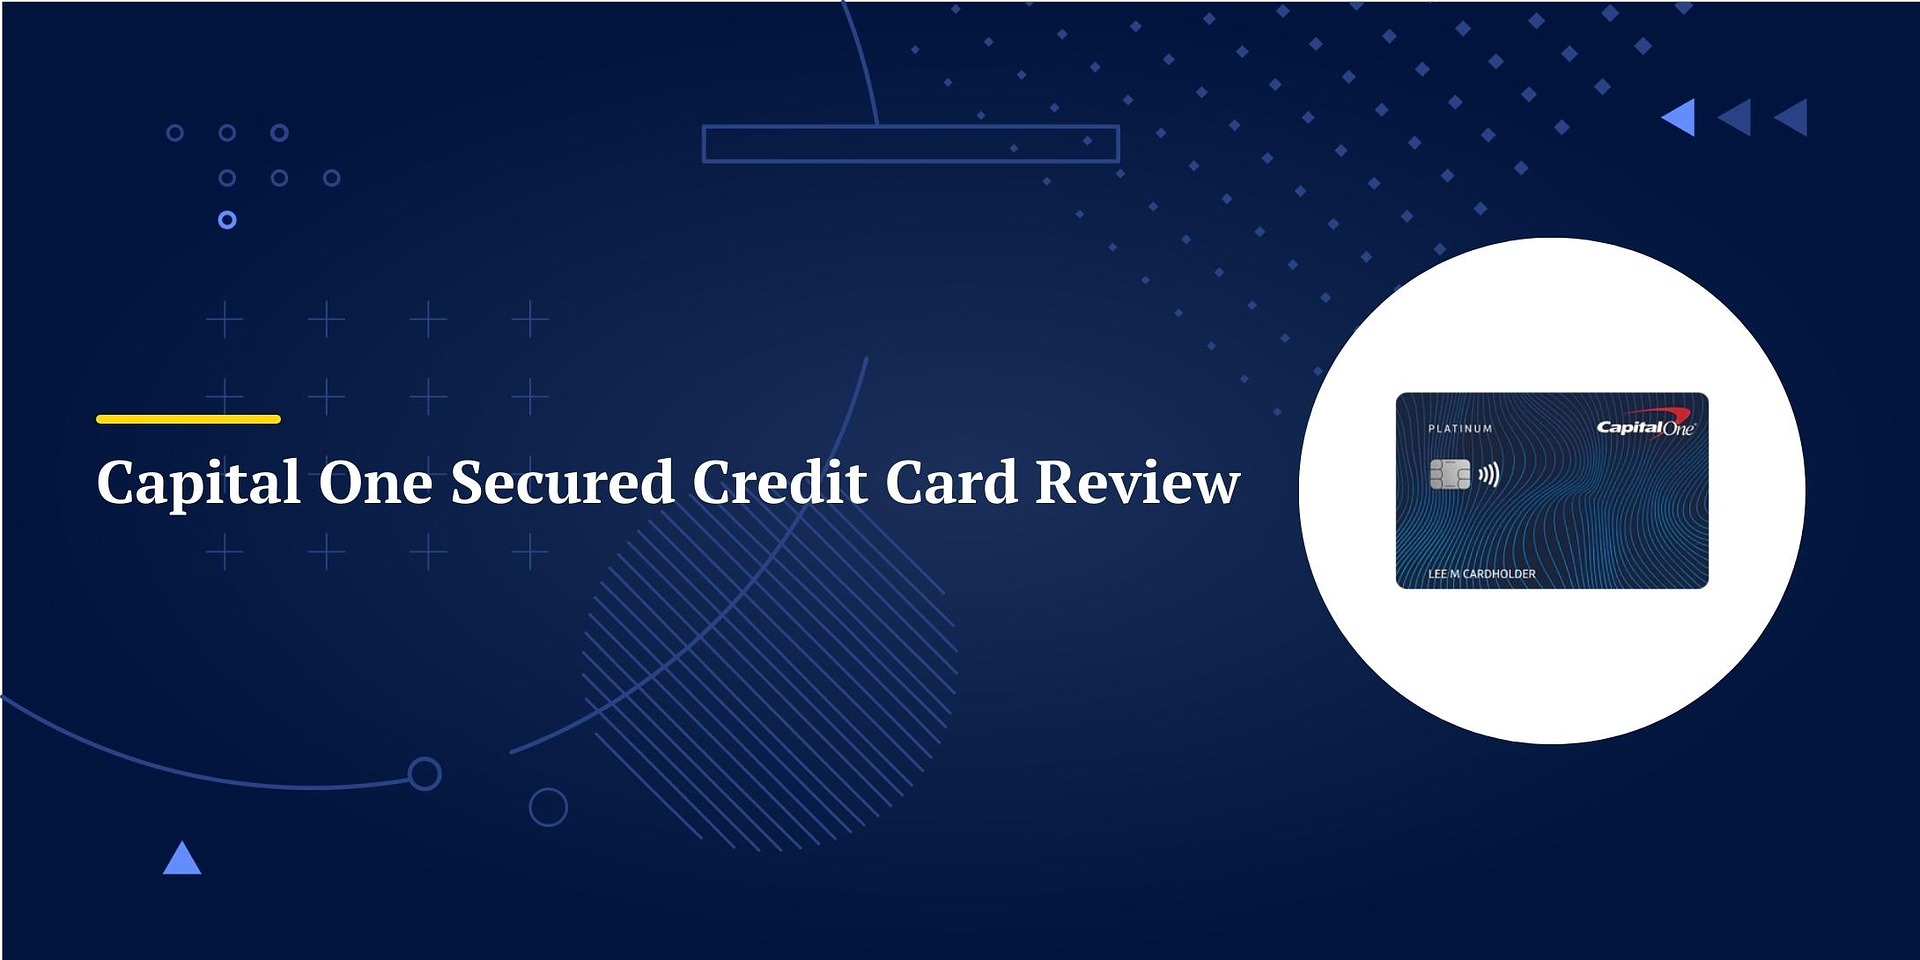 How Much Will The Capital One Secured Card Raise You Credit Score